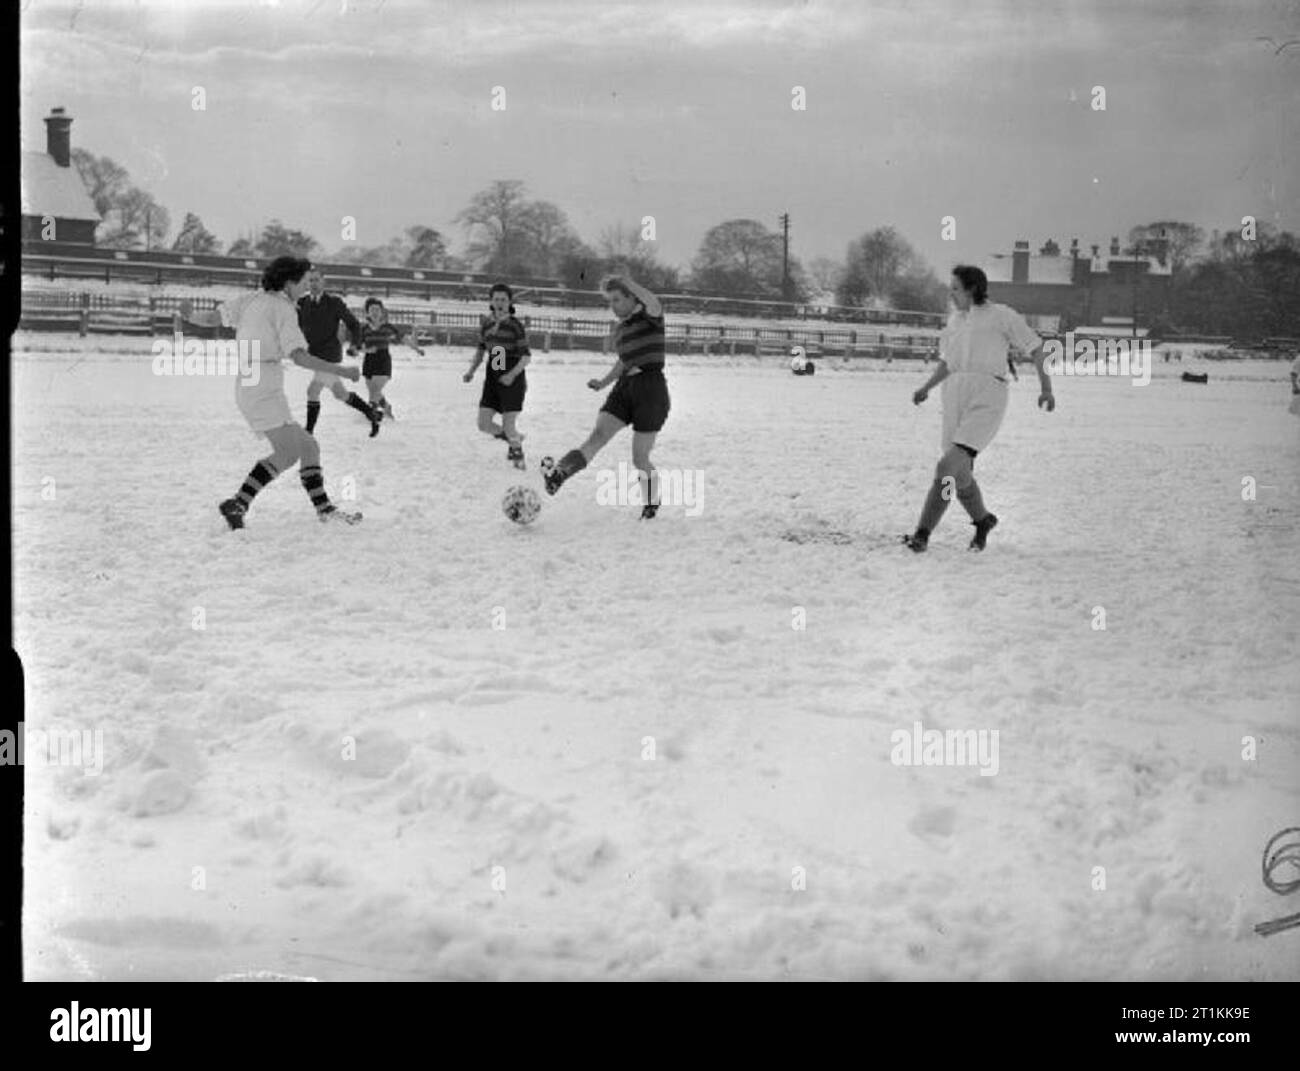 Faireys Play Soccer- a Women's Football Match Between Fairey and Av Roe, Fallowfield, Manchester, Lancashire, England, UK, 1944 A player of the Fairey team (striped jersey) kicks the ball as two members of the AV Roe team (white jerseys) run in from either side. The match is taking place on the snow-covered pitch of Manchester Athletic Club's ground at Fallowfield. Stock Photo